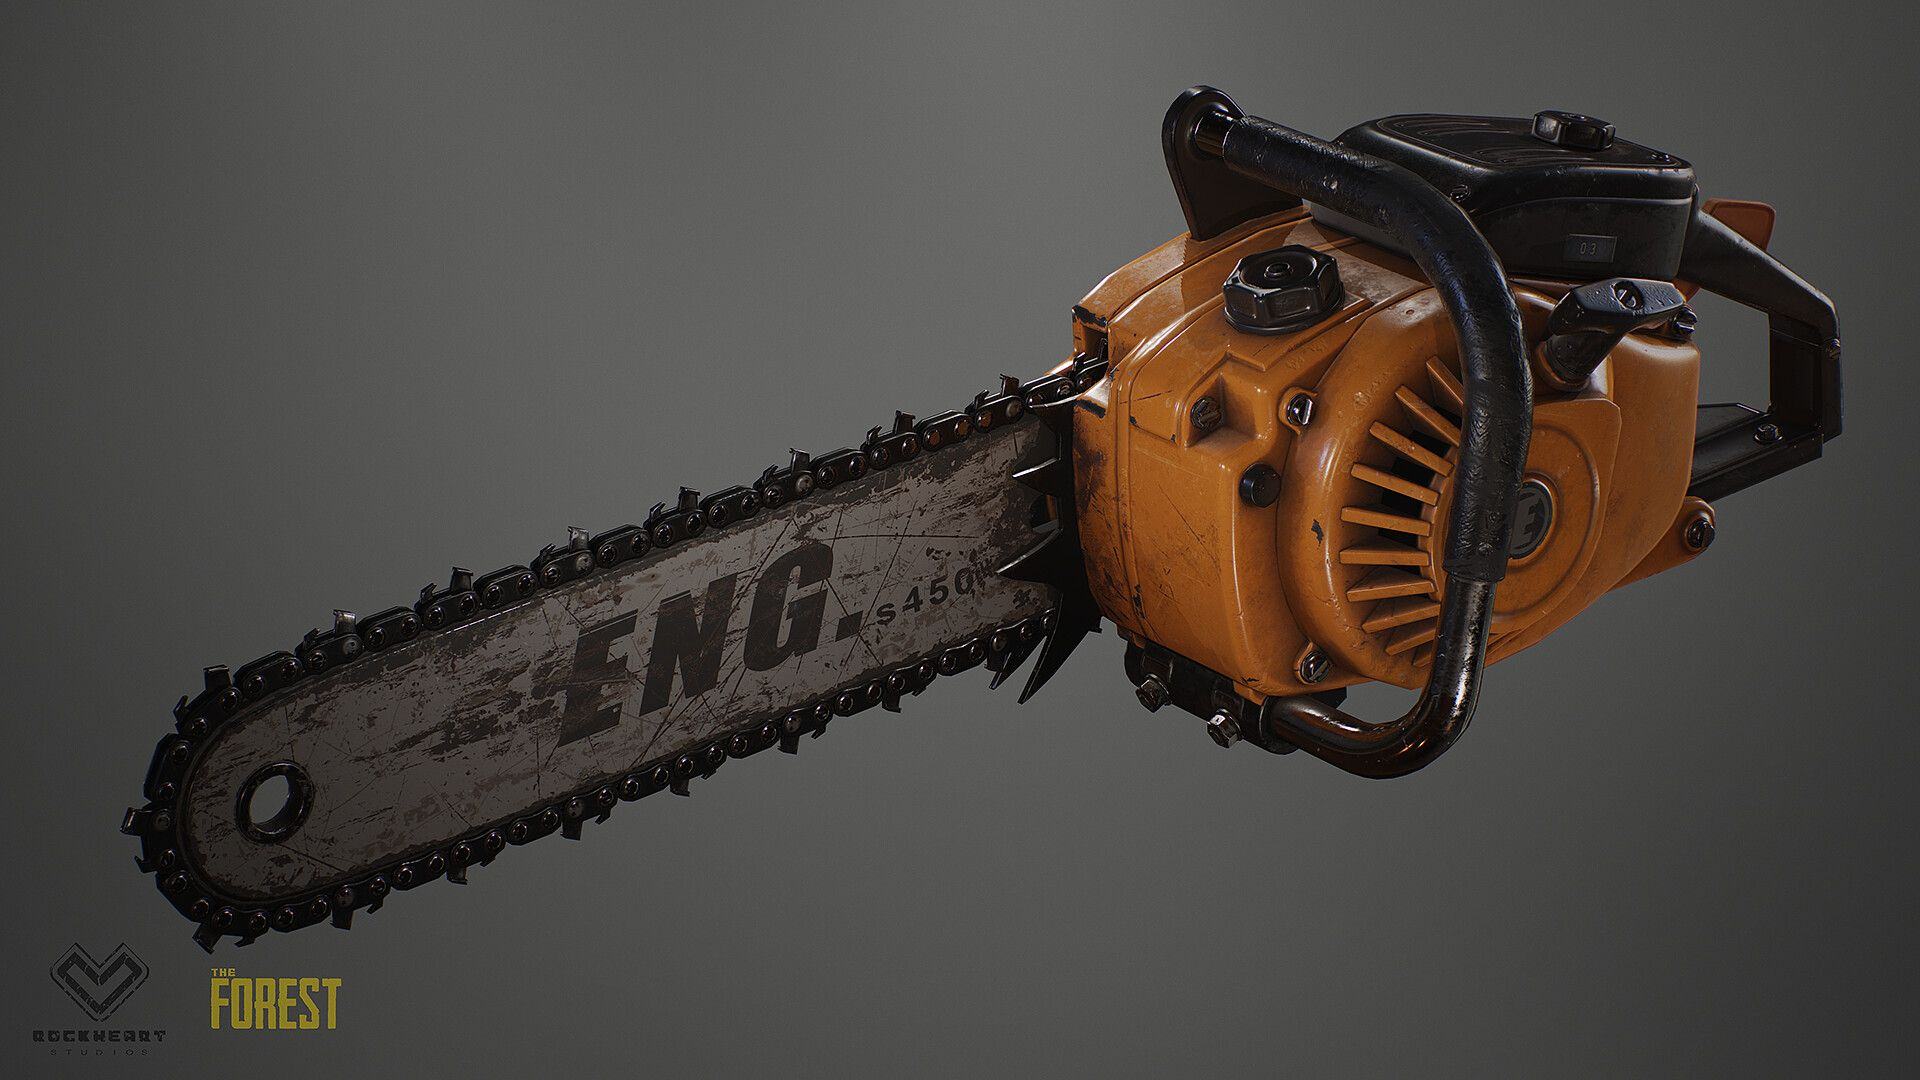 Chainsaw model art in Children of the Forest